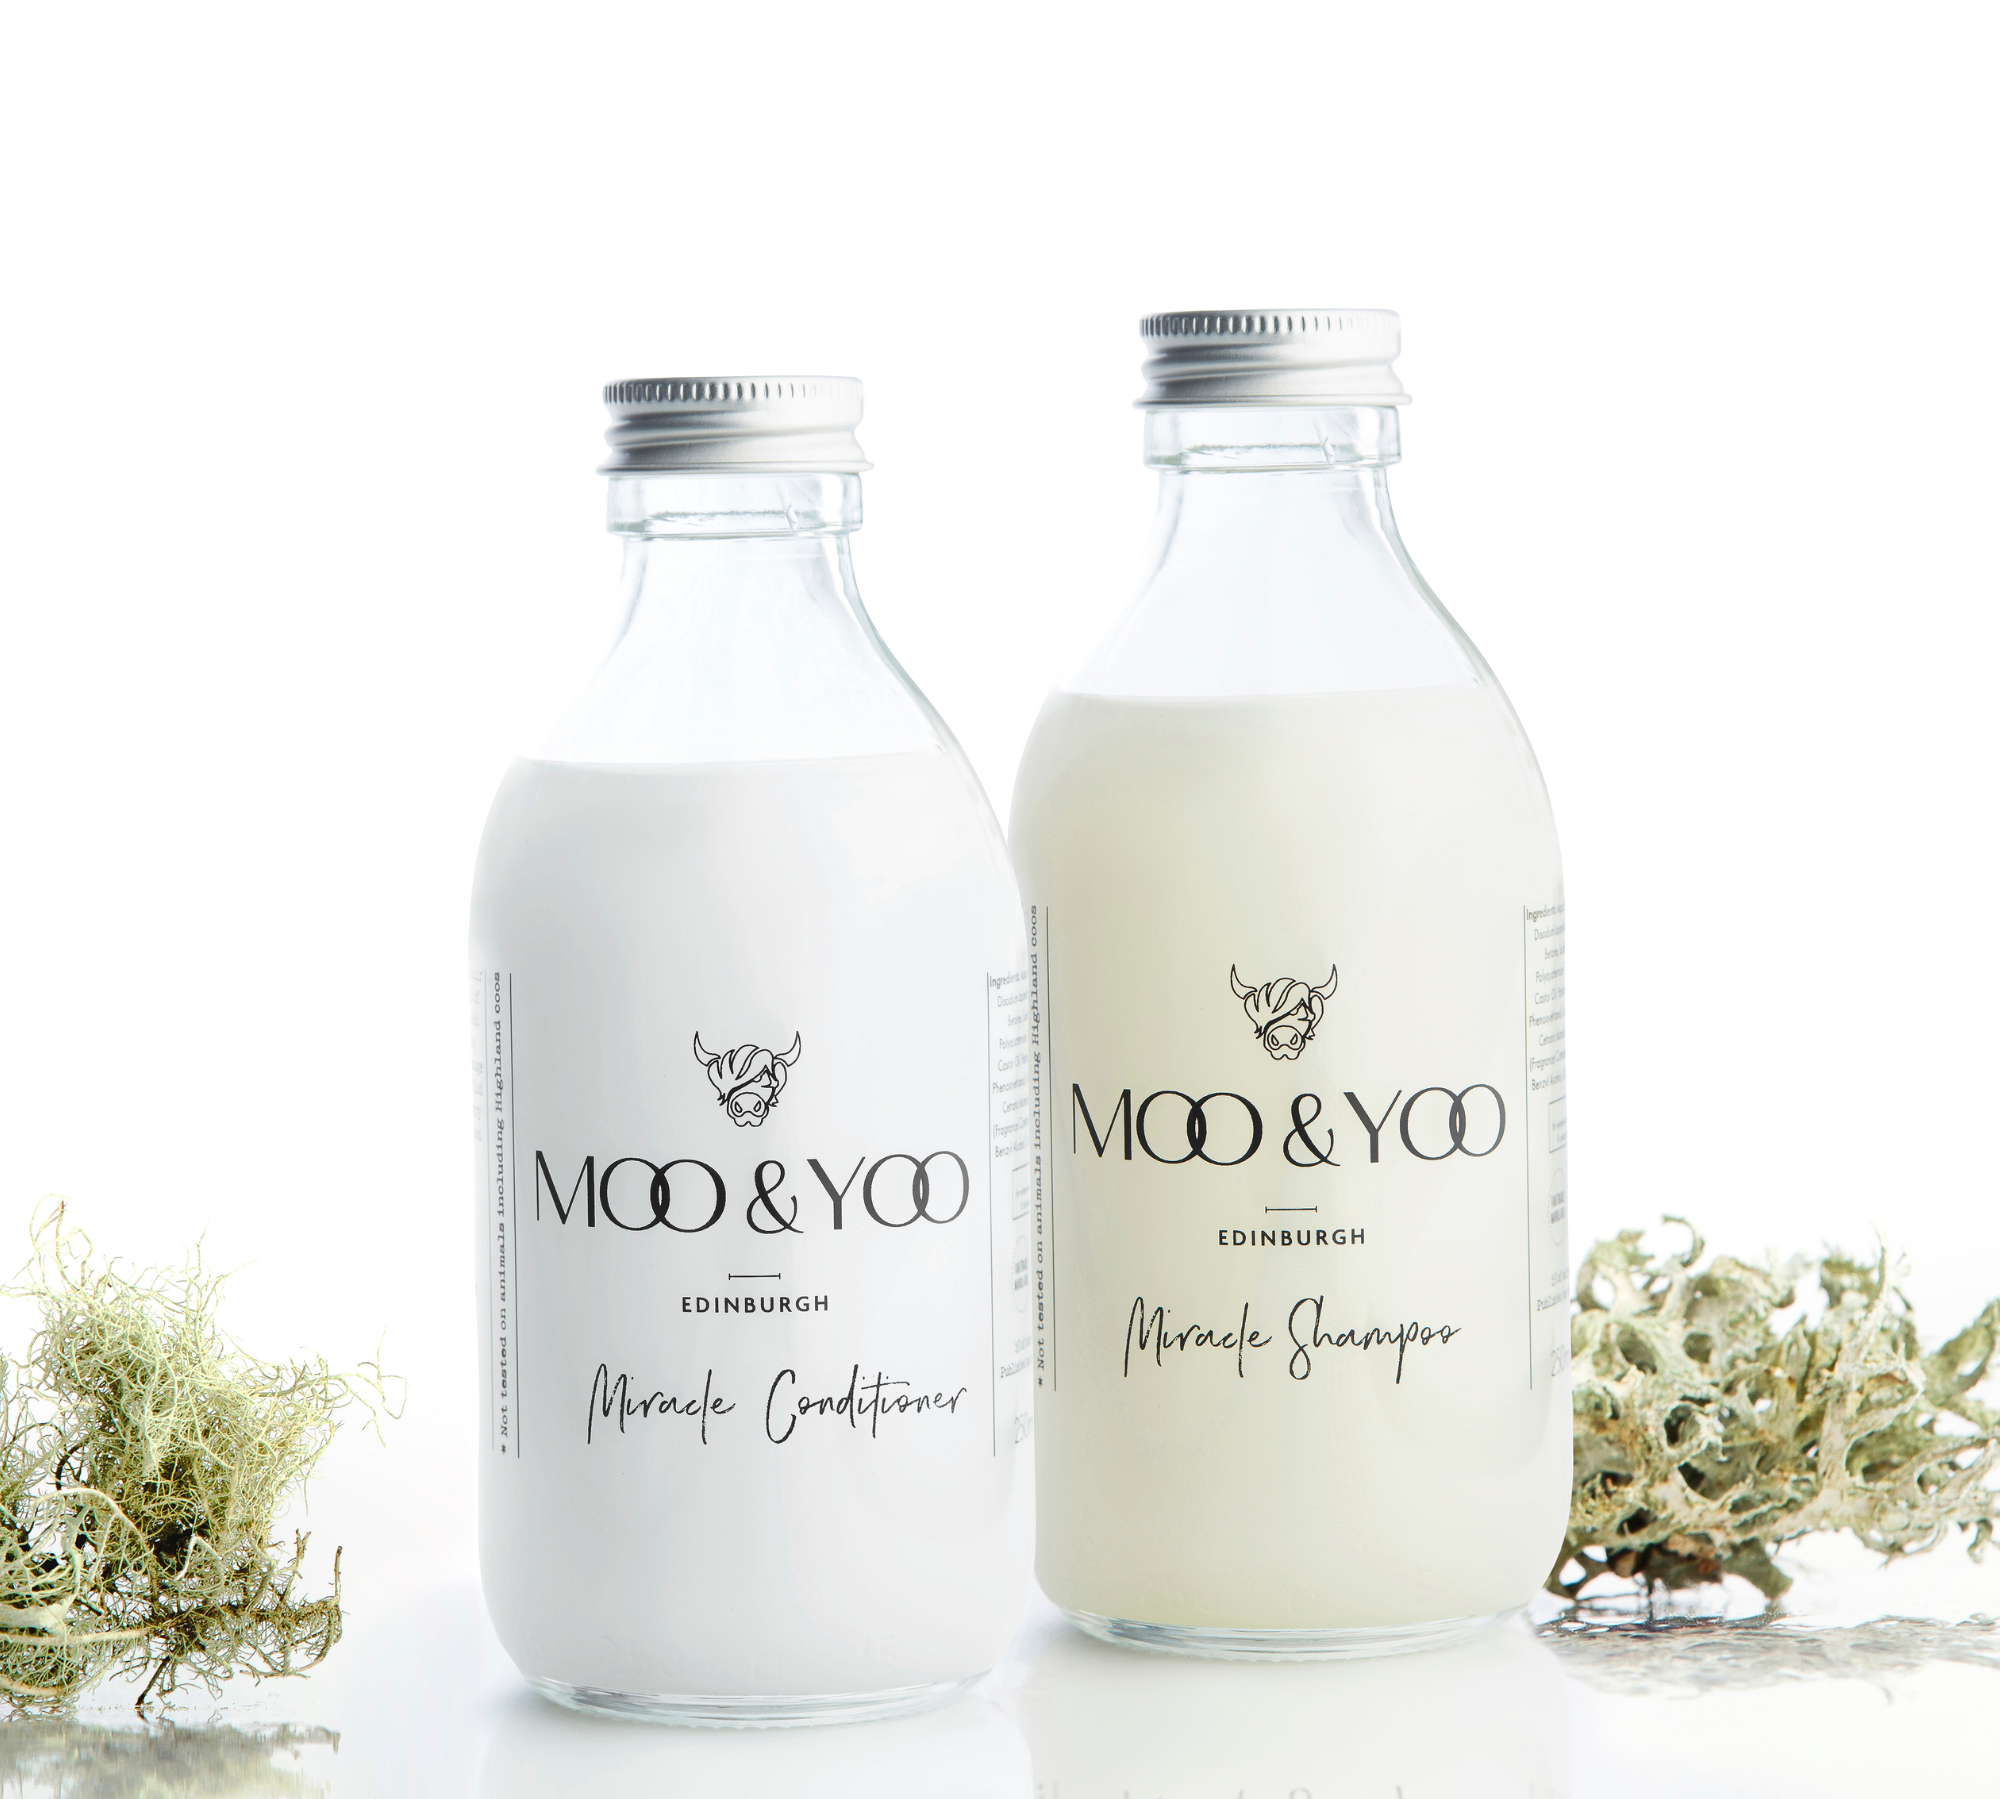 A glass bottle of Moo and Yoo Miracle Conditioner and a glass bottle of Moo and Yoo Miracle Shampoo sitting side by side with aluminium lids on a white background with a sprig of Icelandic moss placed to each side.